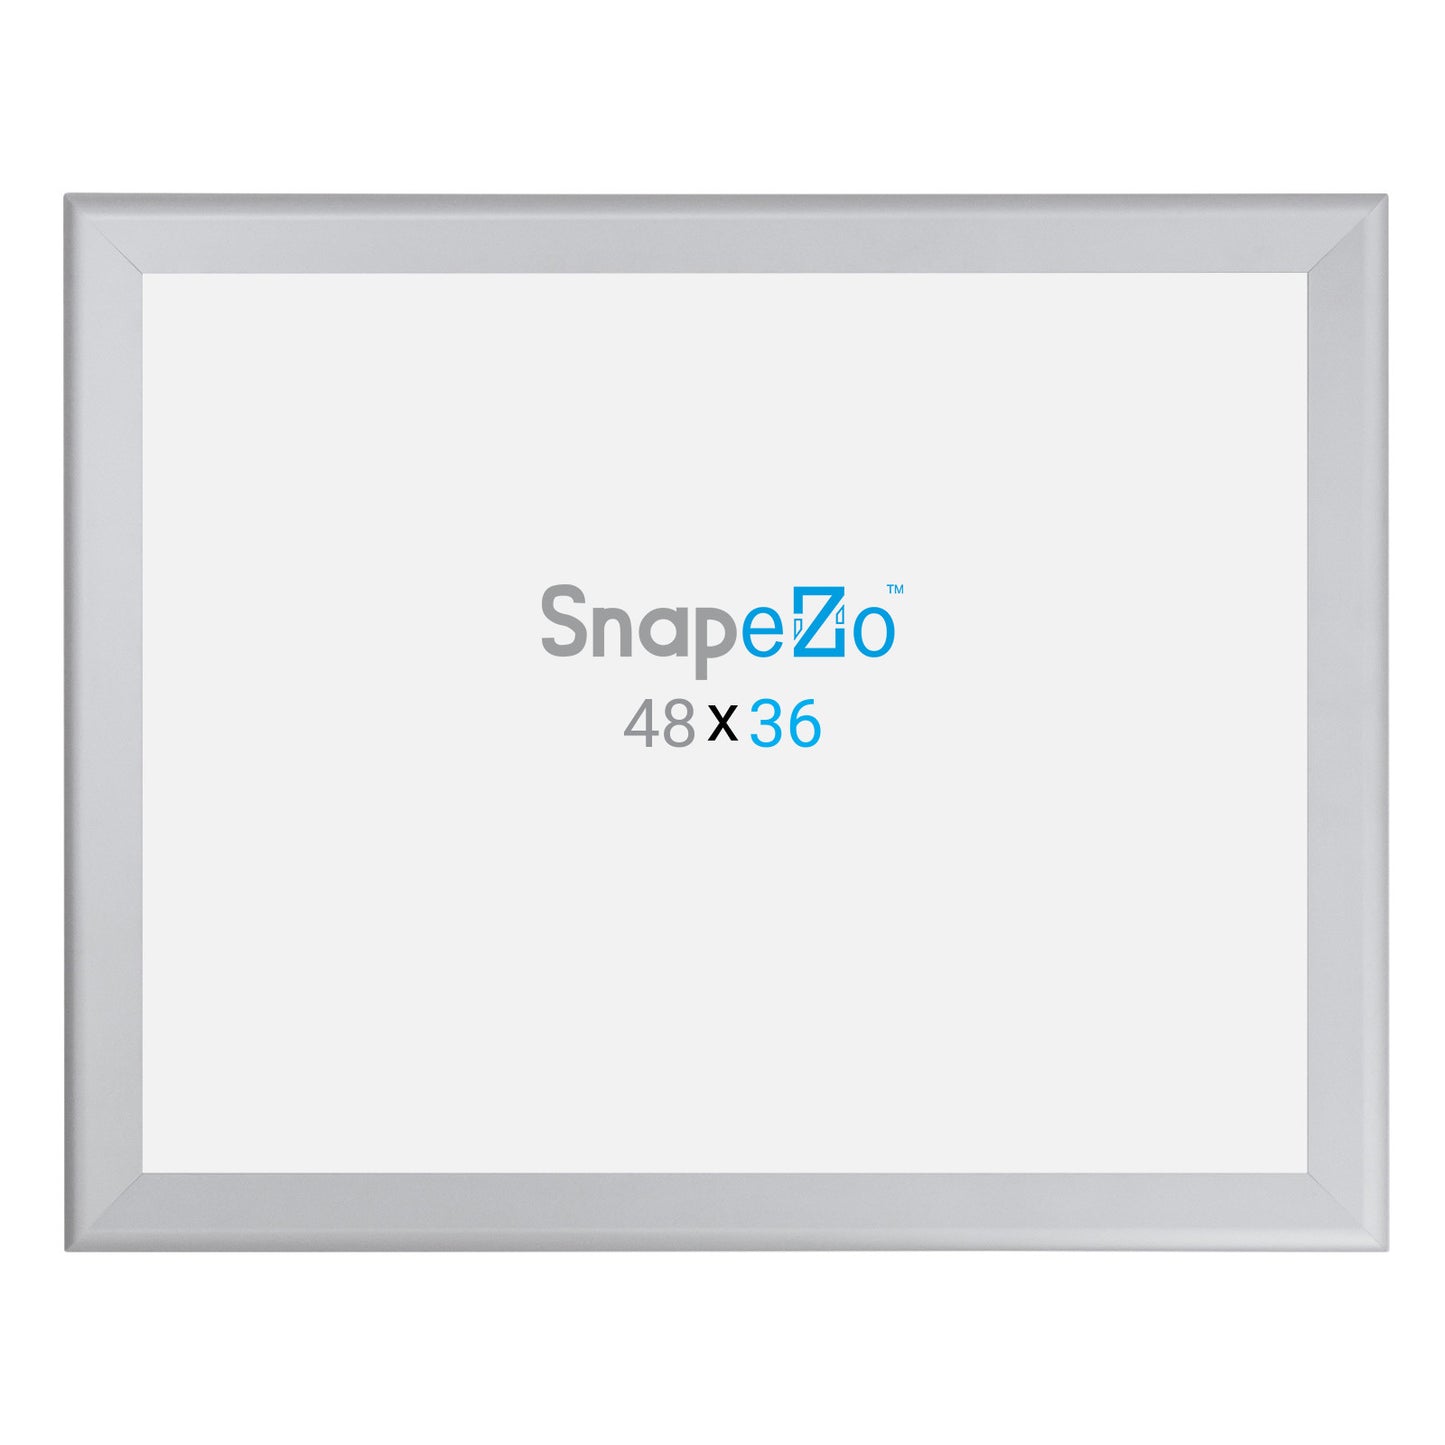 3 Case Pack of Snapezo® of Silver 36x48 Poster Frame - 1.7" Profile